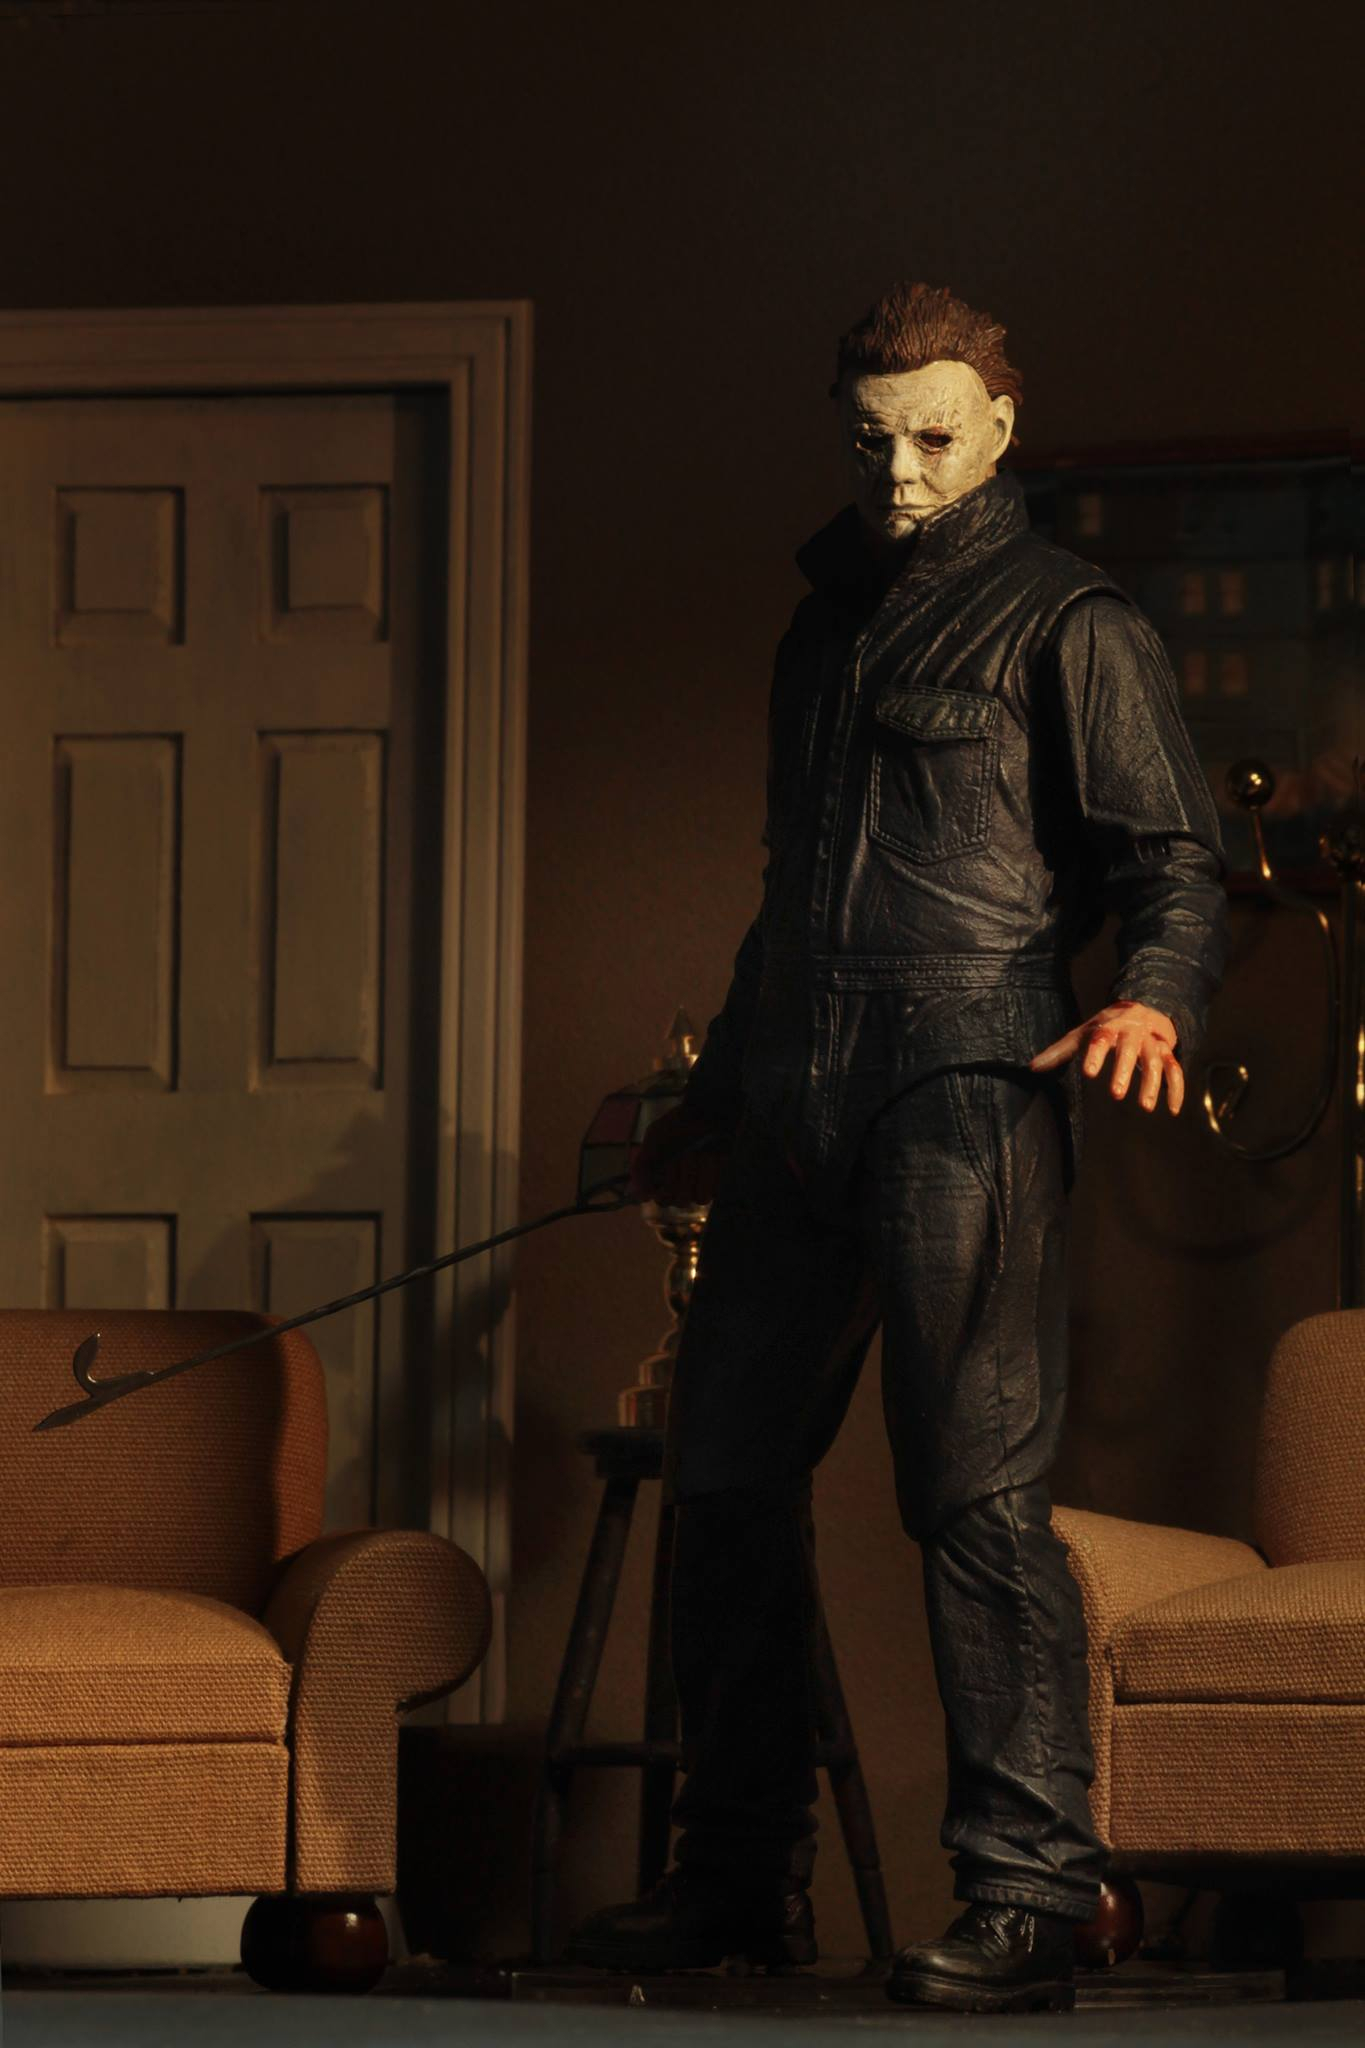 New Photos Of The Halloween 2018 Michael Myers Figure By encequiconcerne Halloween 7